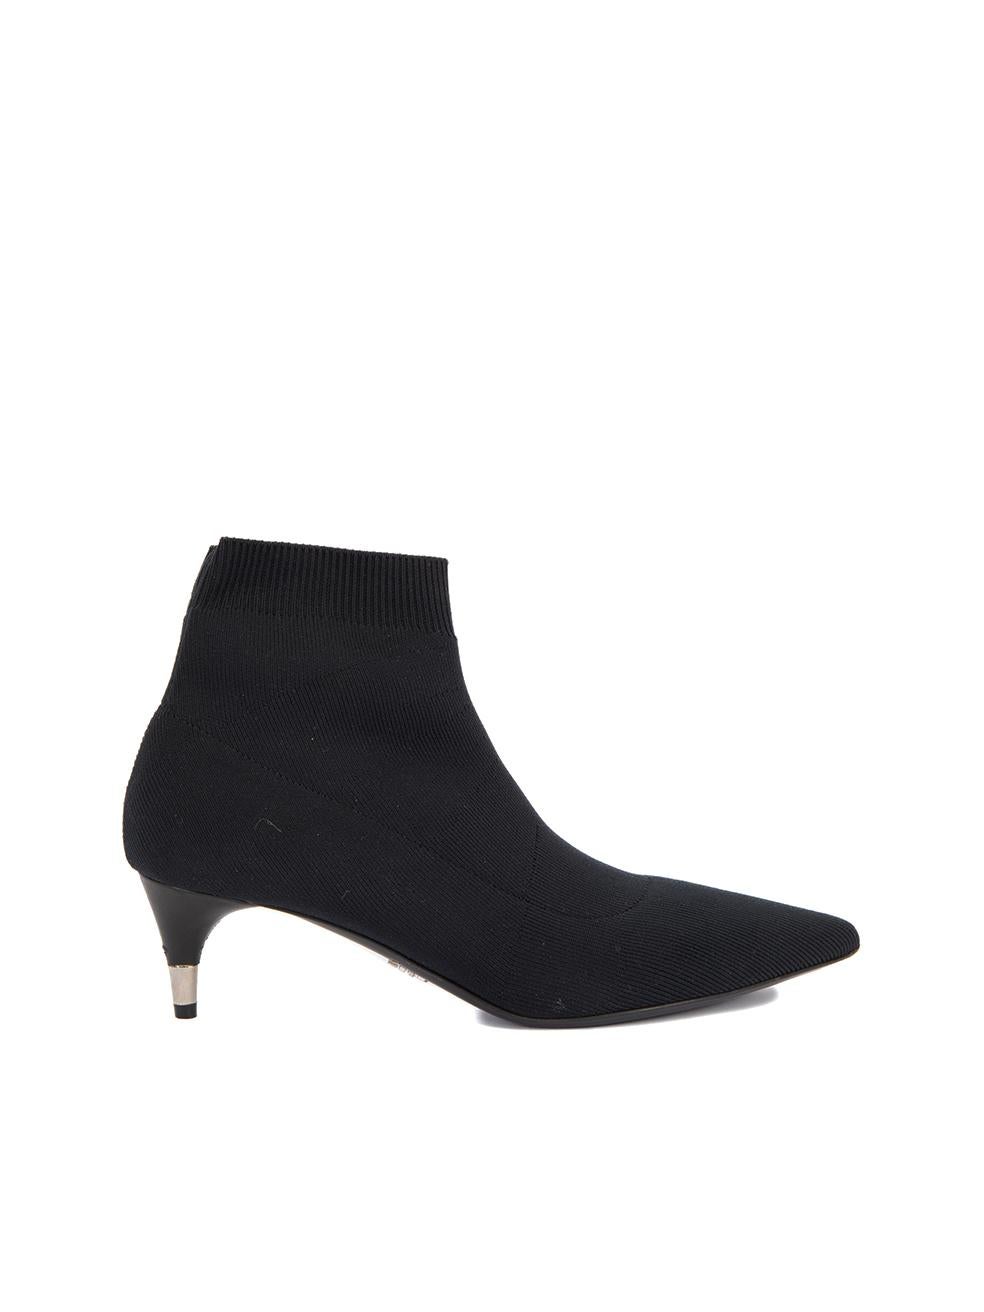 CONDITION is Very good. Minimal wear to shoes is evident, indent can be seen on the right heel of this used Prada designer resale item. Details Black Cloth Sock ankle boots Pointed toe Kitten heel Leather interior Made in Italy Composition Exterior: